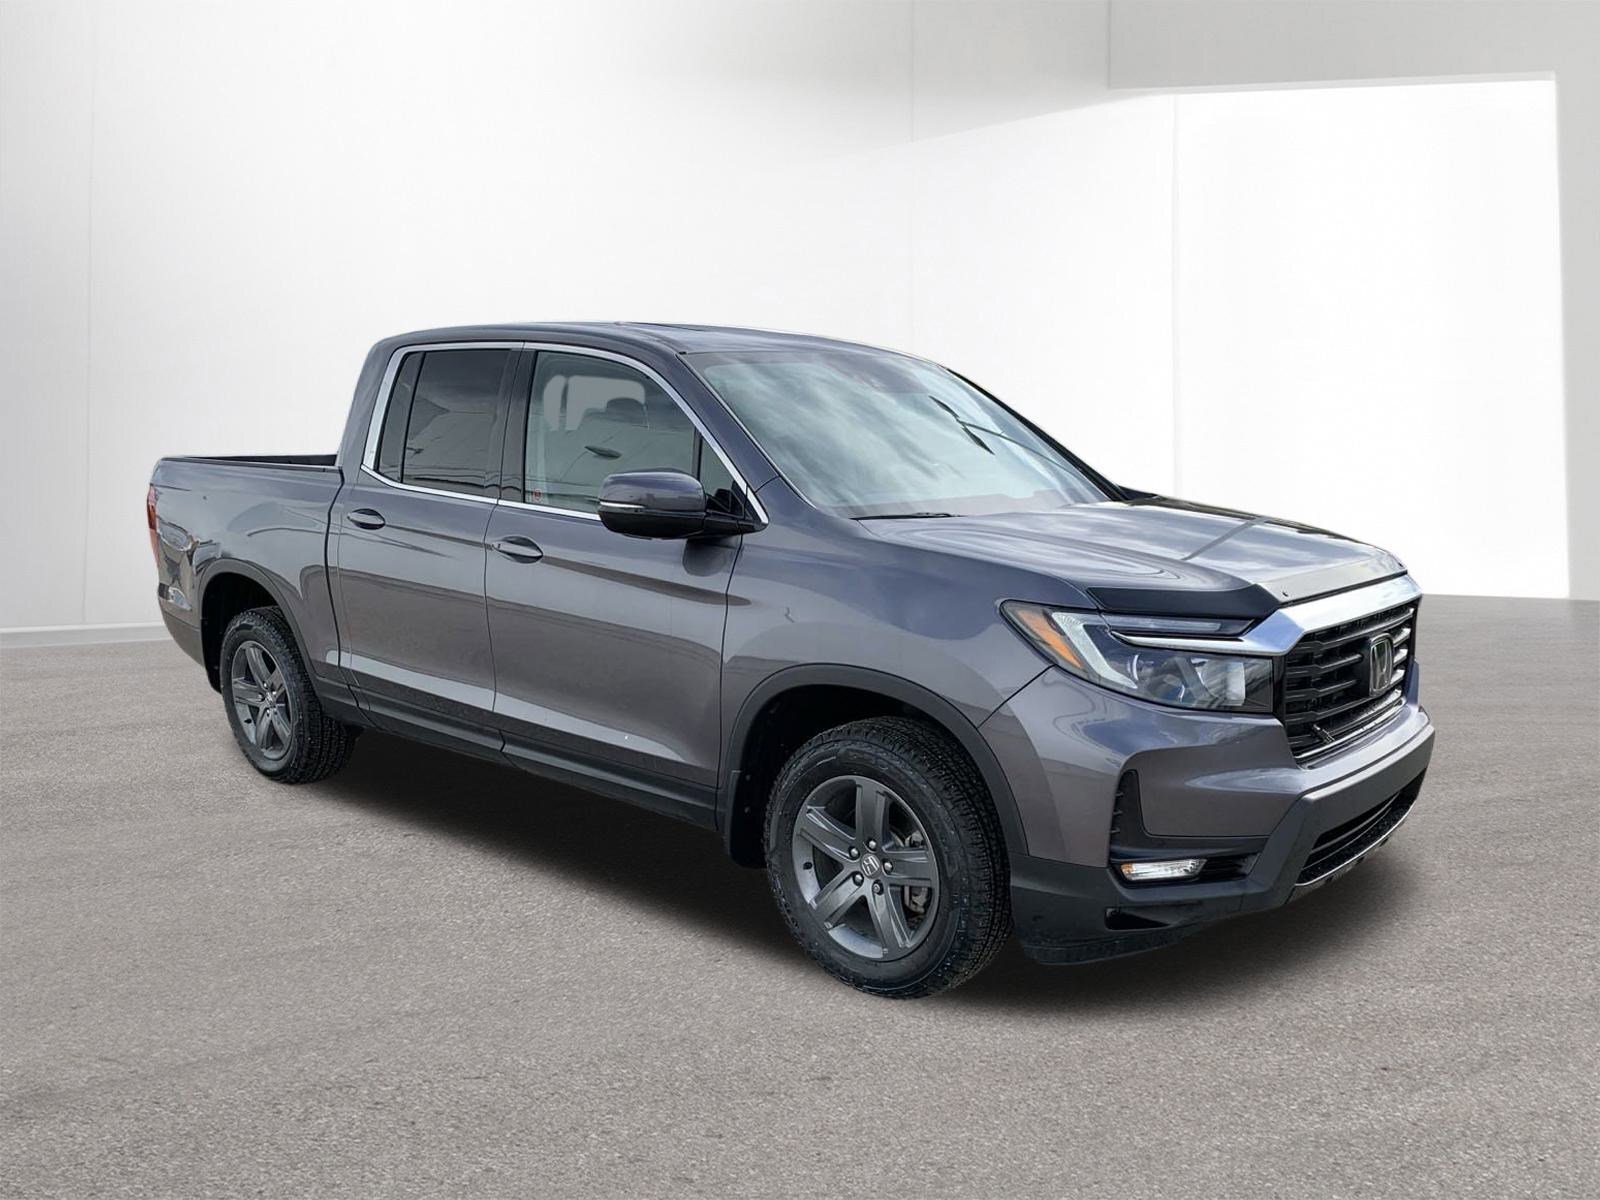 2022 Honda Ridgeline Touring - Fully LOADED (1 Owner / No Accidents)